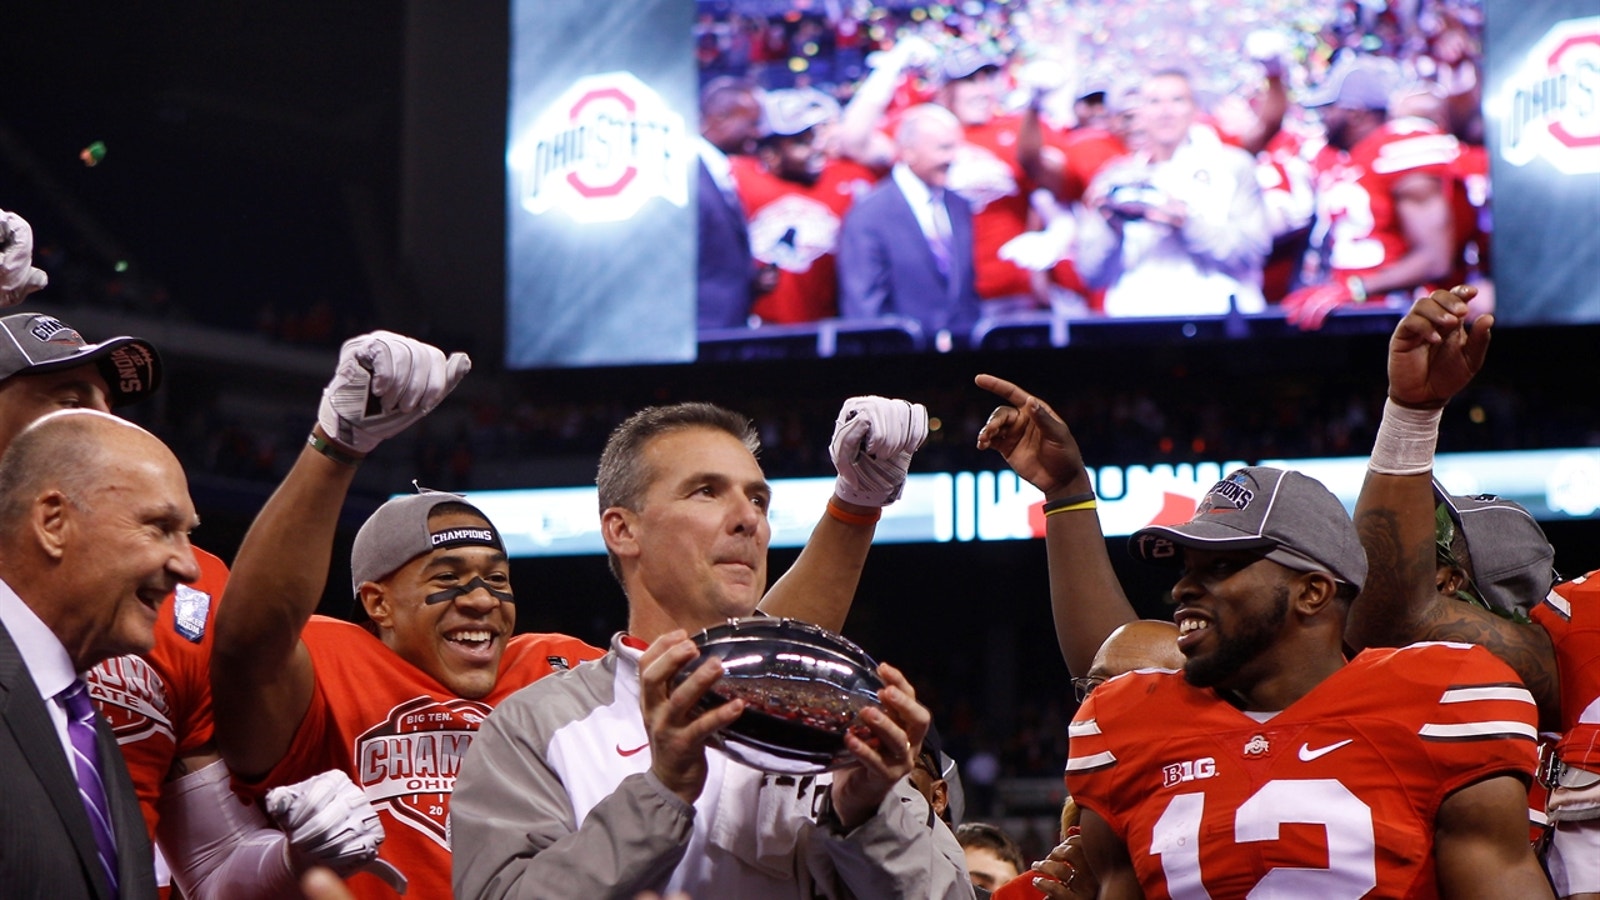 Urban Meyer explains why he chose to run up the score against Wisconsin in 2014